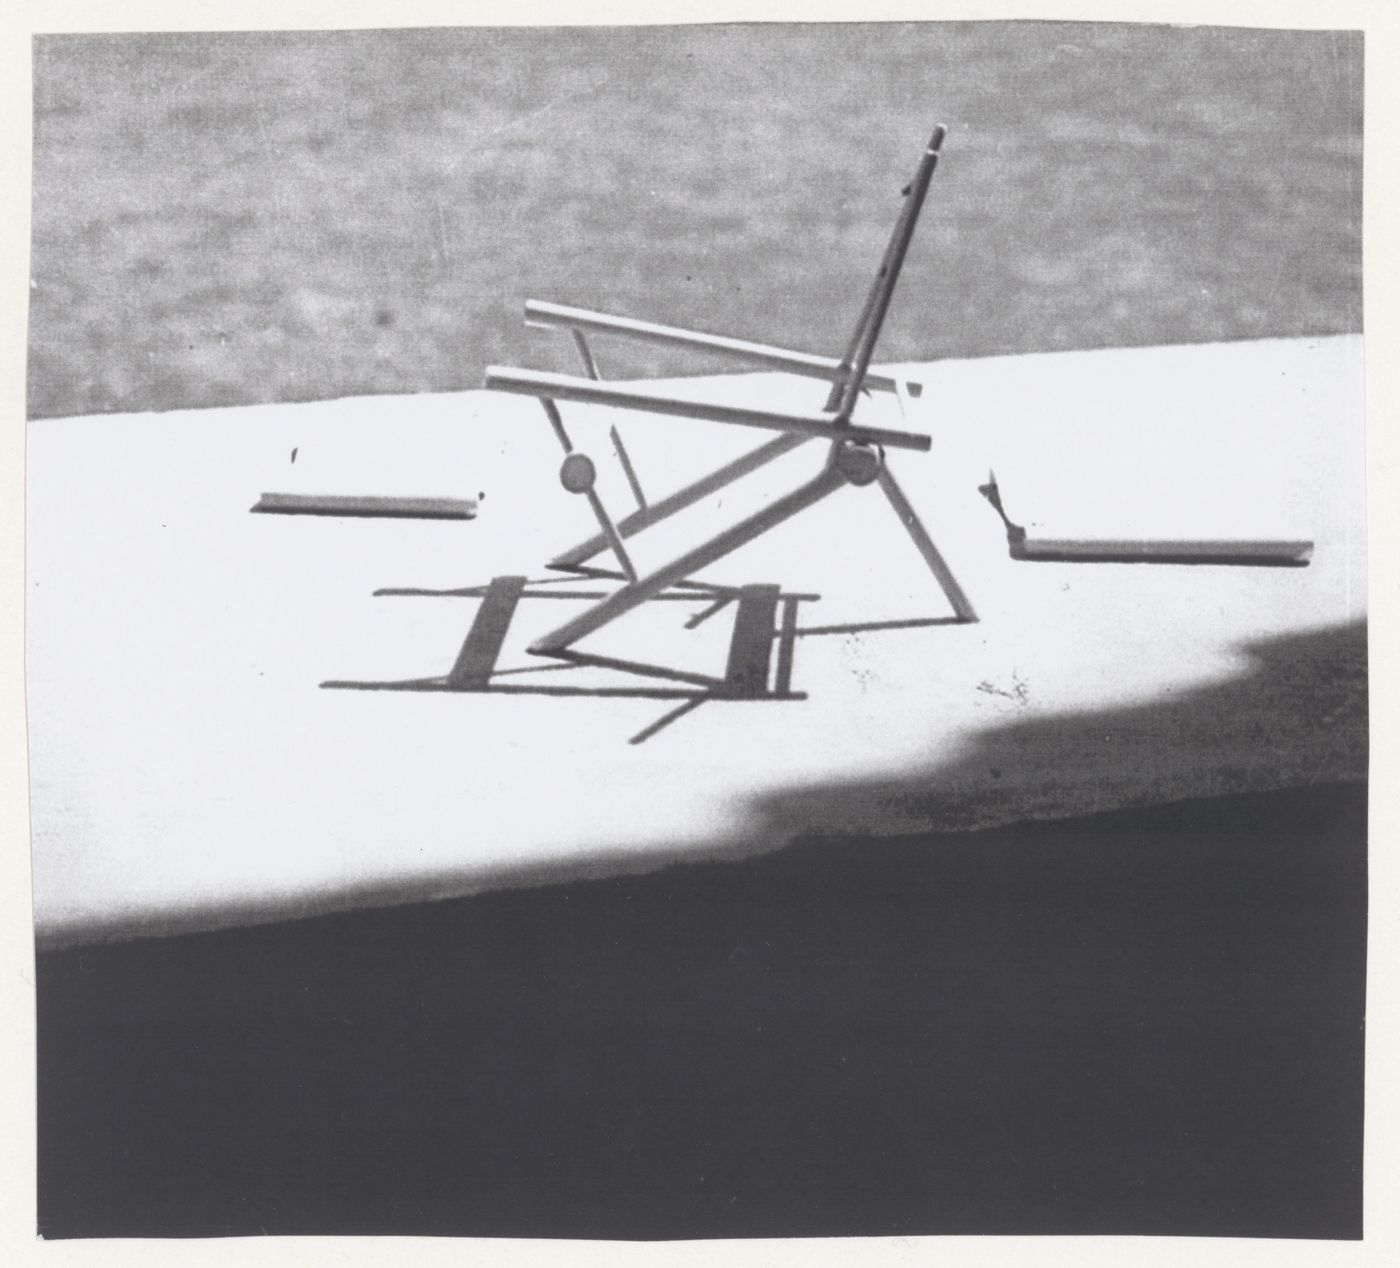 View of a wood structure for a chair possibly designed by Pierre Jeanneret, Chandigarh, India